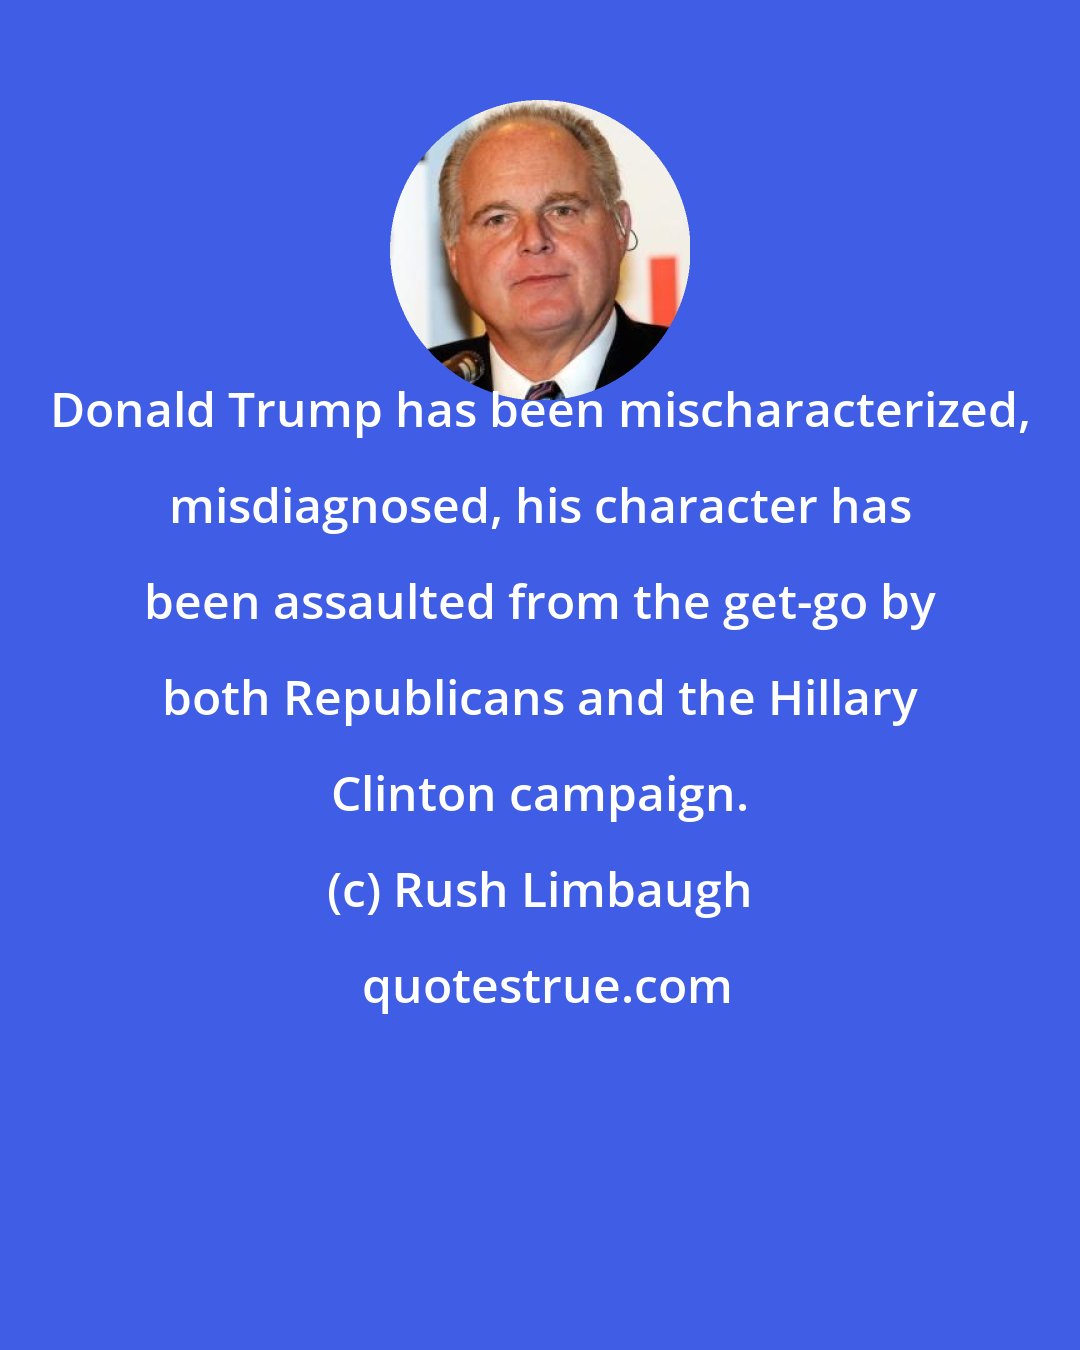 Rush Limbaugh: Donald Trump has been mischaracterized, misdiagnosed, his character has been assaulted from the get-go by both Republicans and the Hillary Clinton campaign.